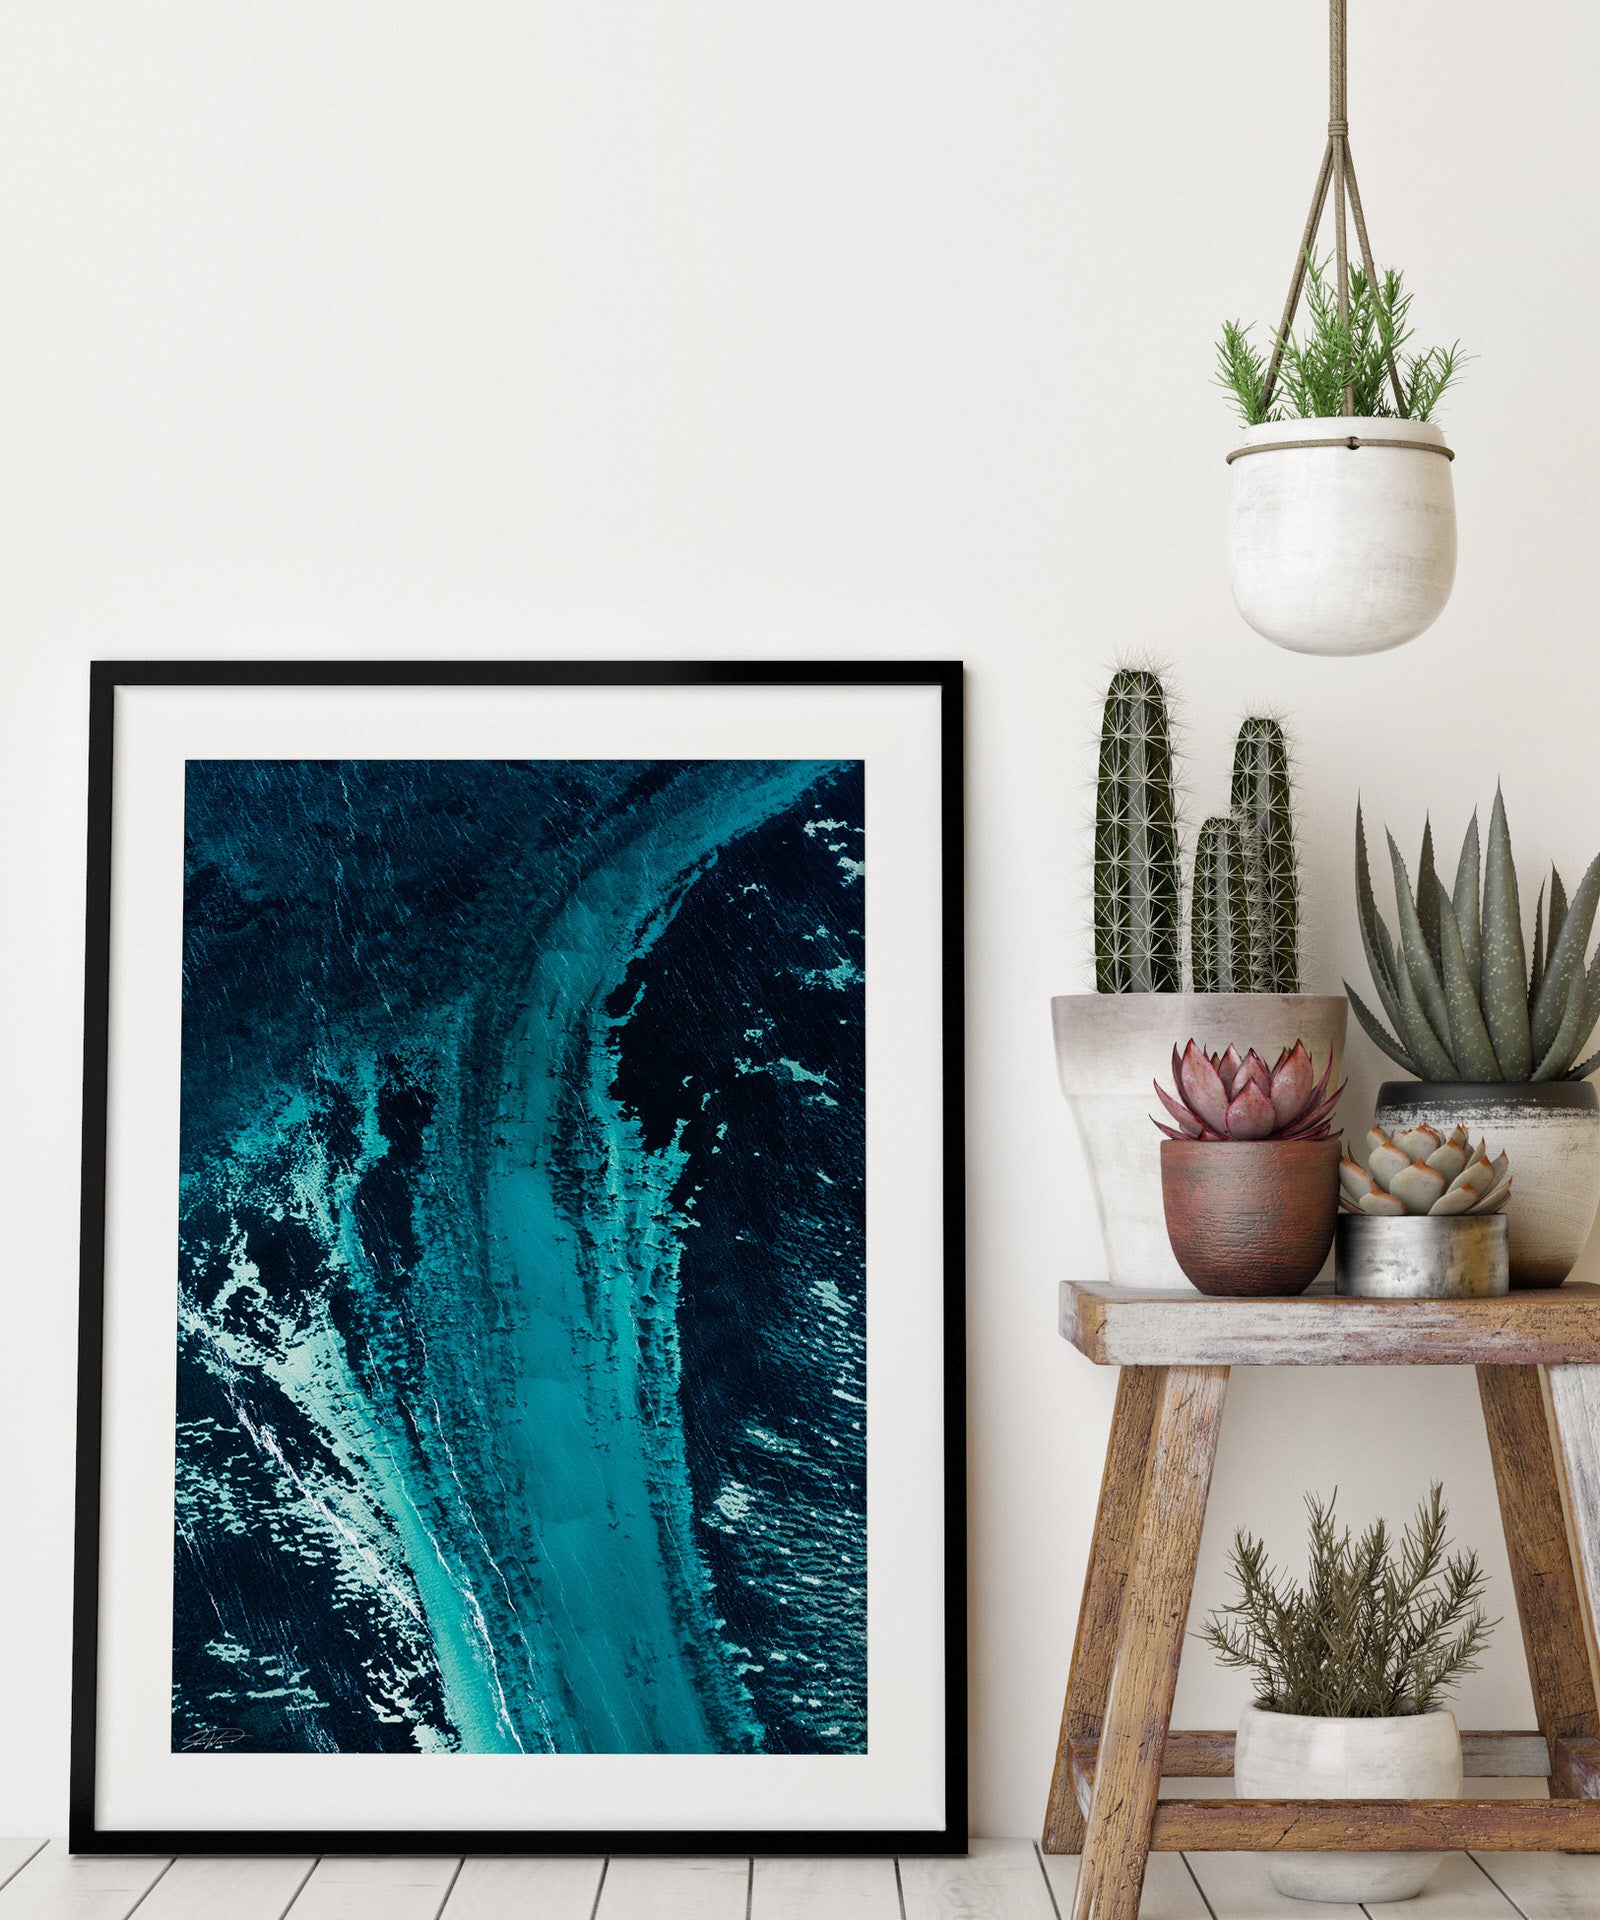 black frame with blue art against a wall with cactus